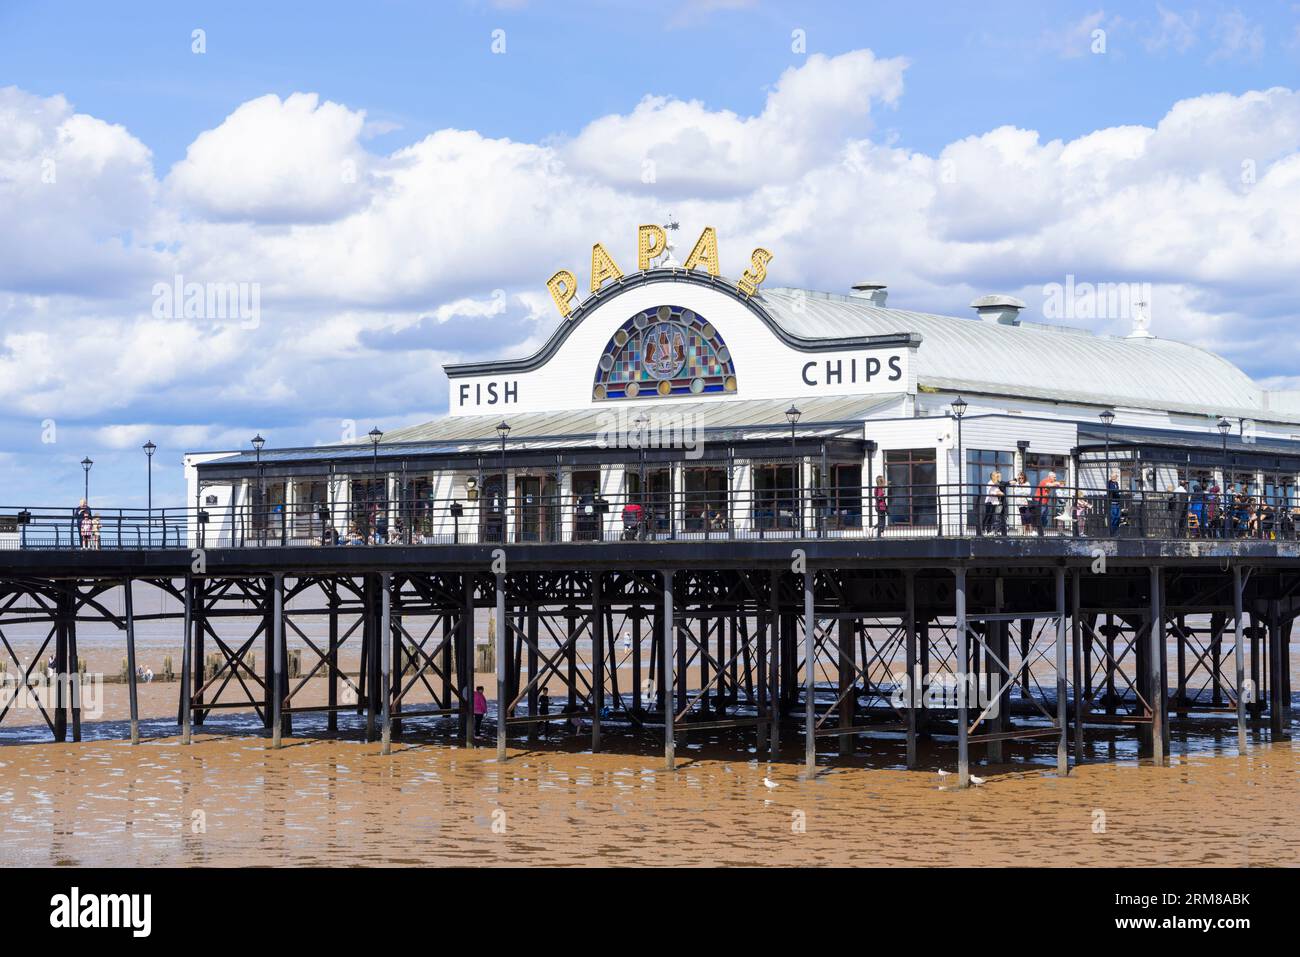 Cleethorpes The Pier Cleethorpes Papas fish and chips restaurant and takeaway on the pier at Cleethorpes Lincolnshire England UK GB Europe Stock Photo